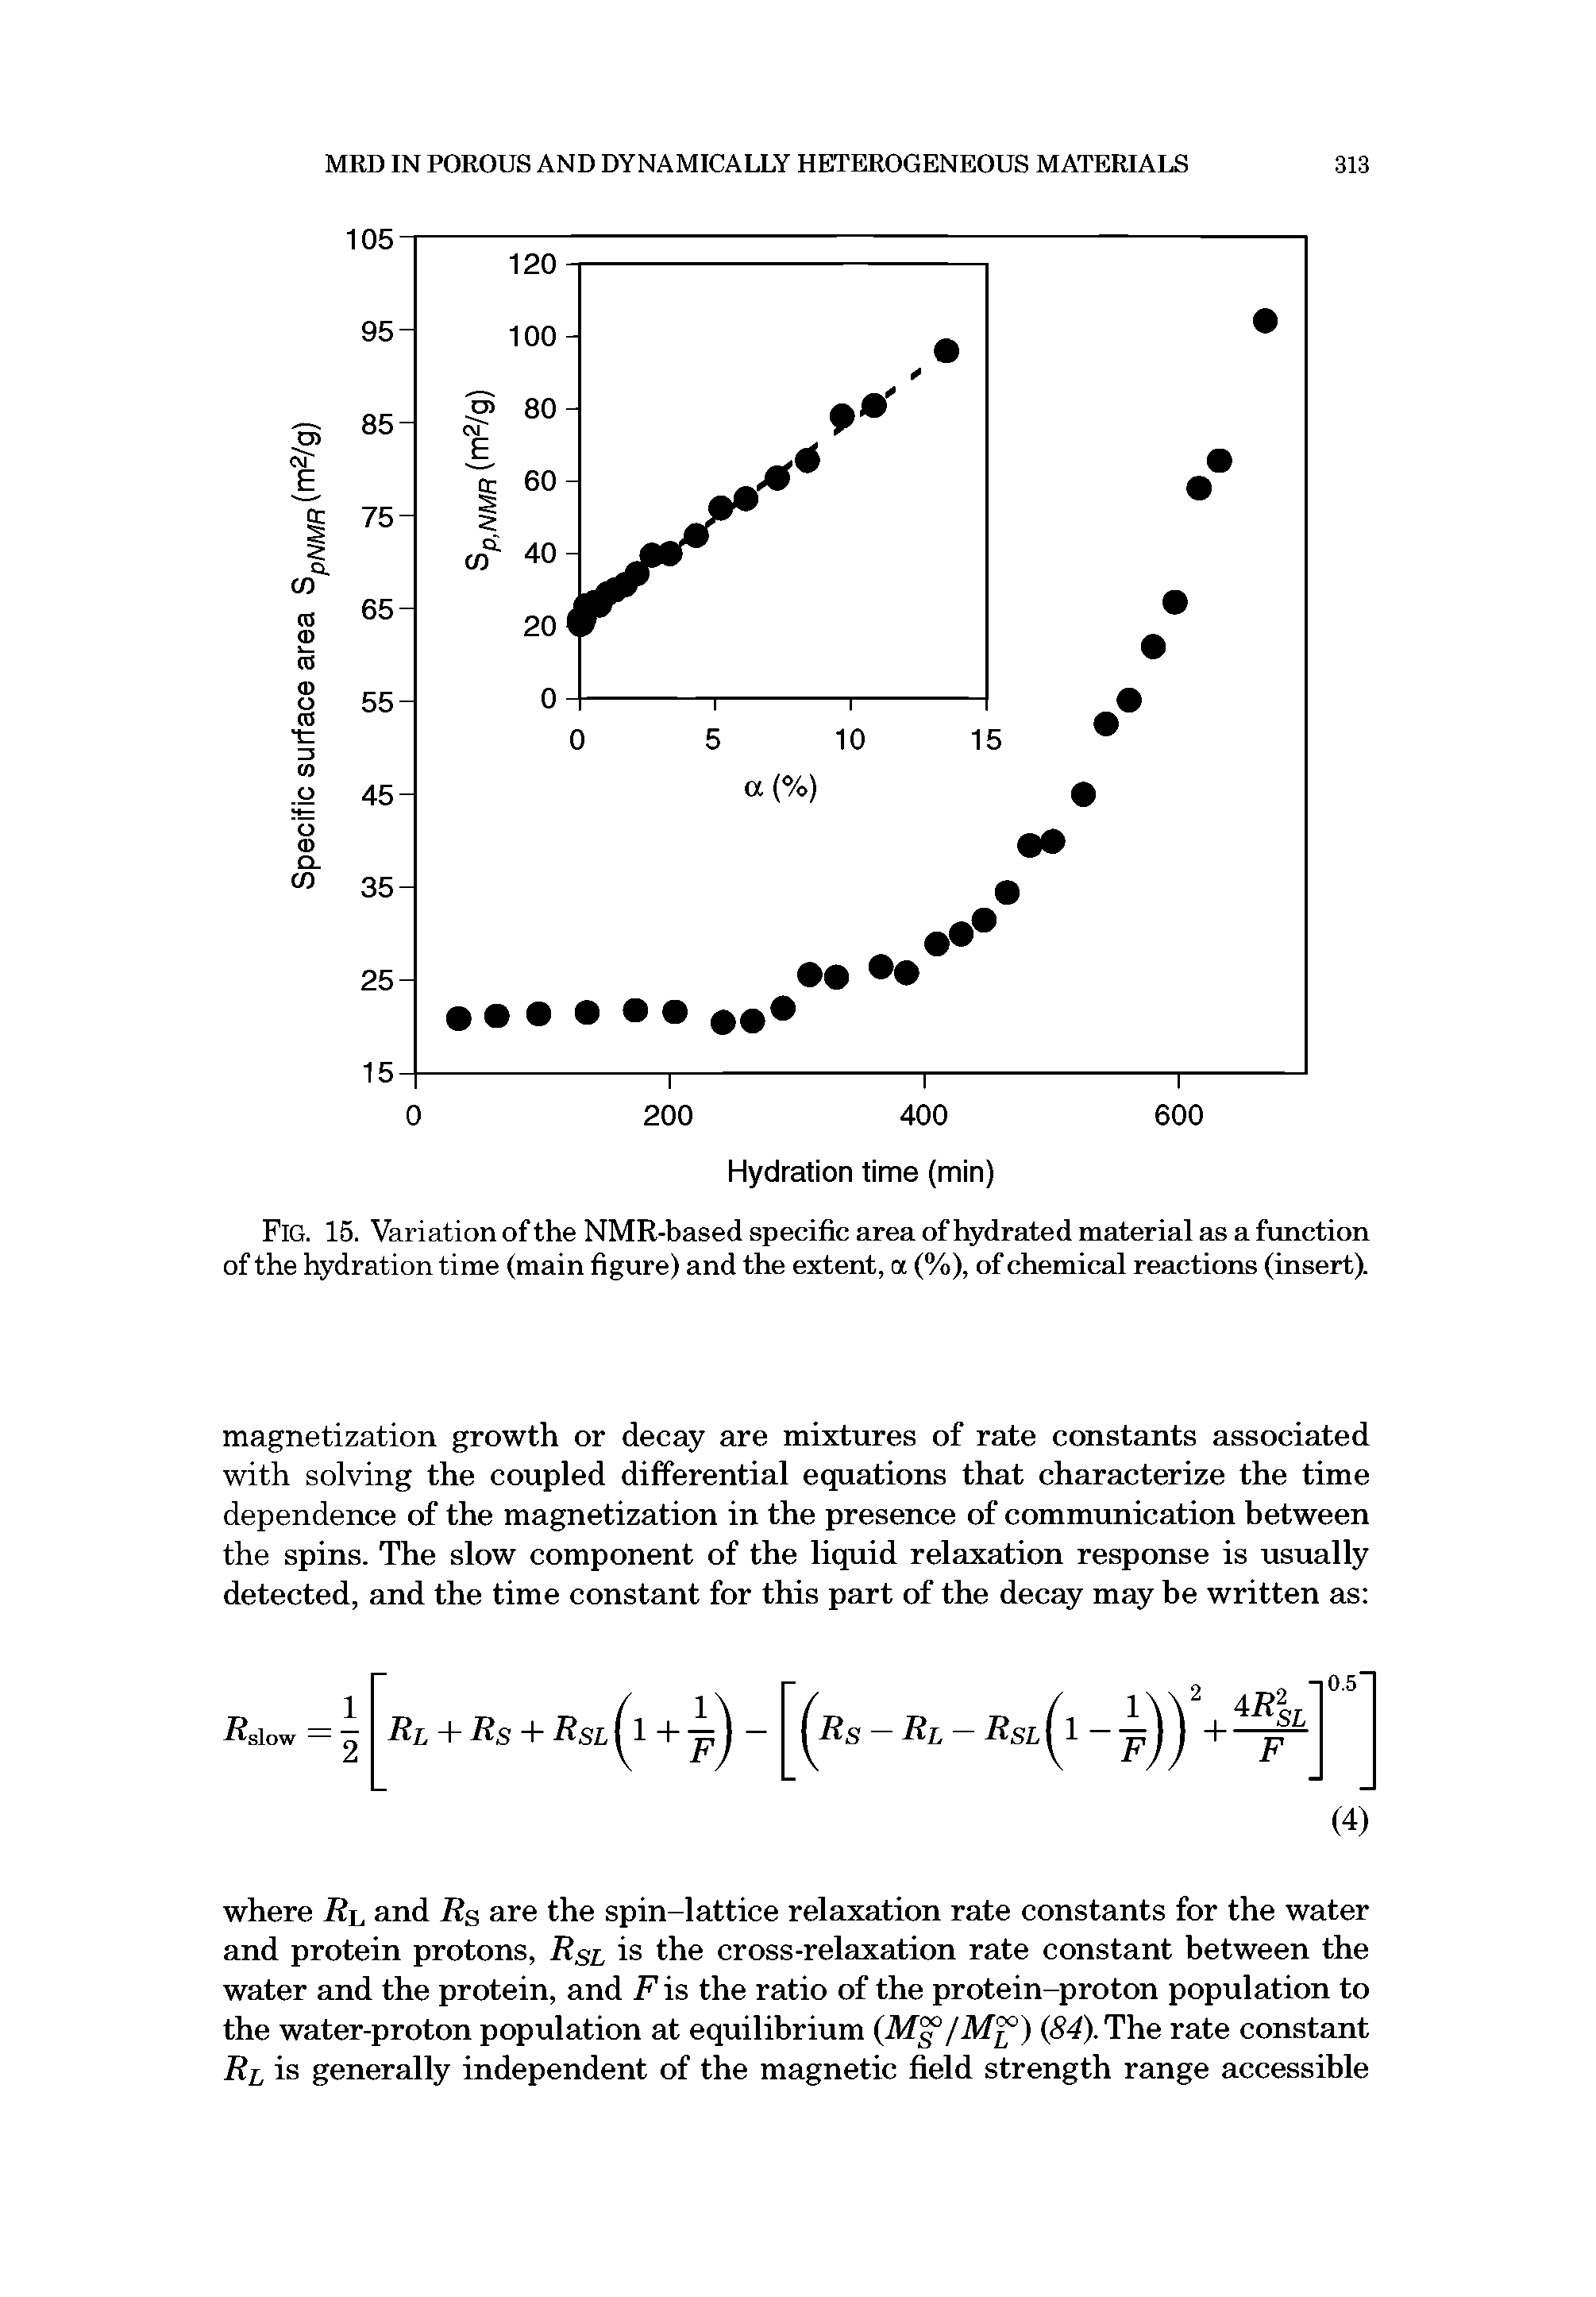 Fig. 15. Variation of the NMR-based specific area of hydrated material as a function of the hydration time (main figure) and the extent, a (%), of chemical reactions (insert).